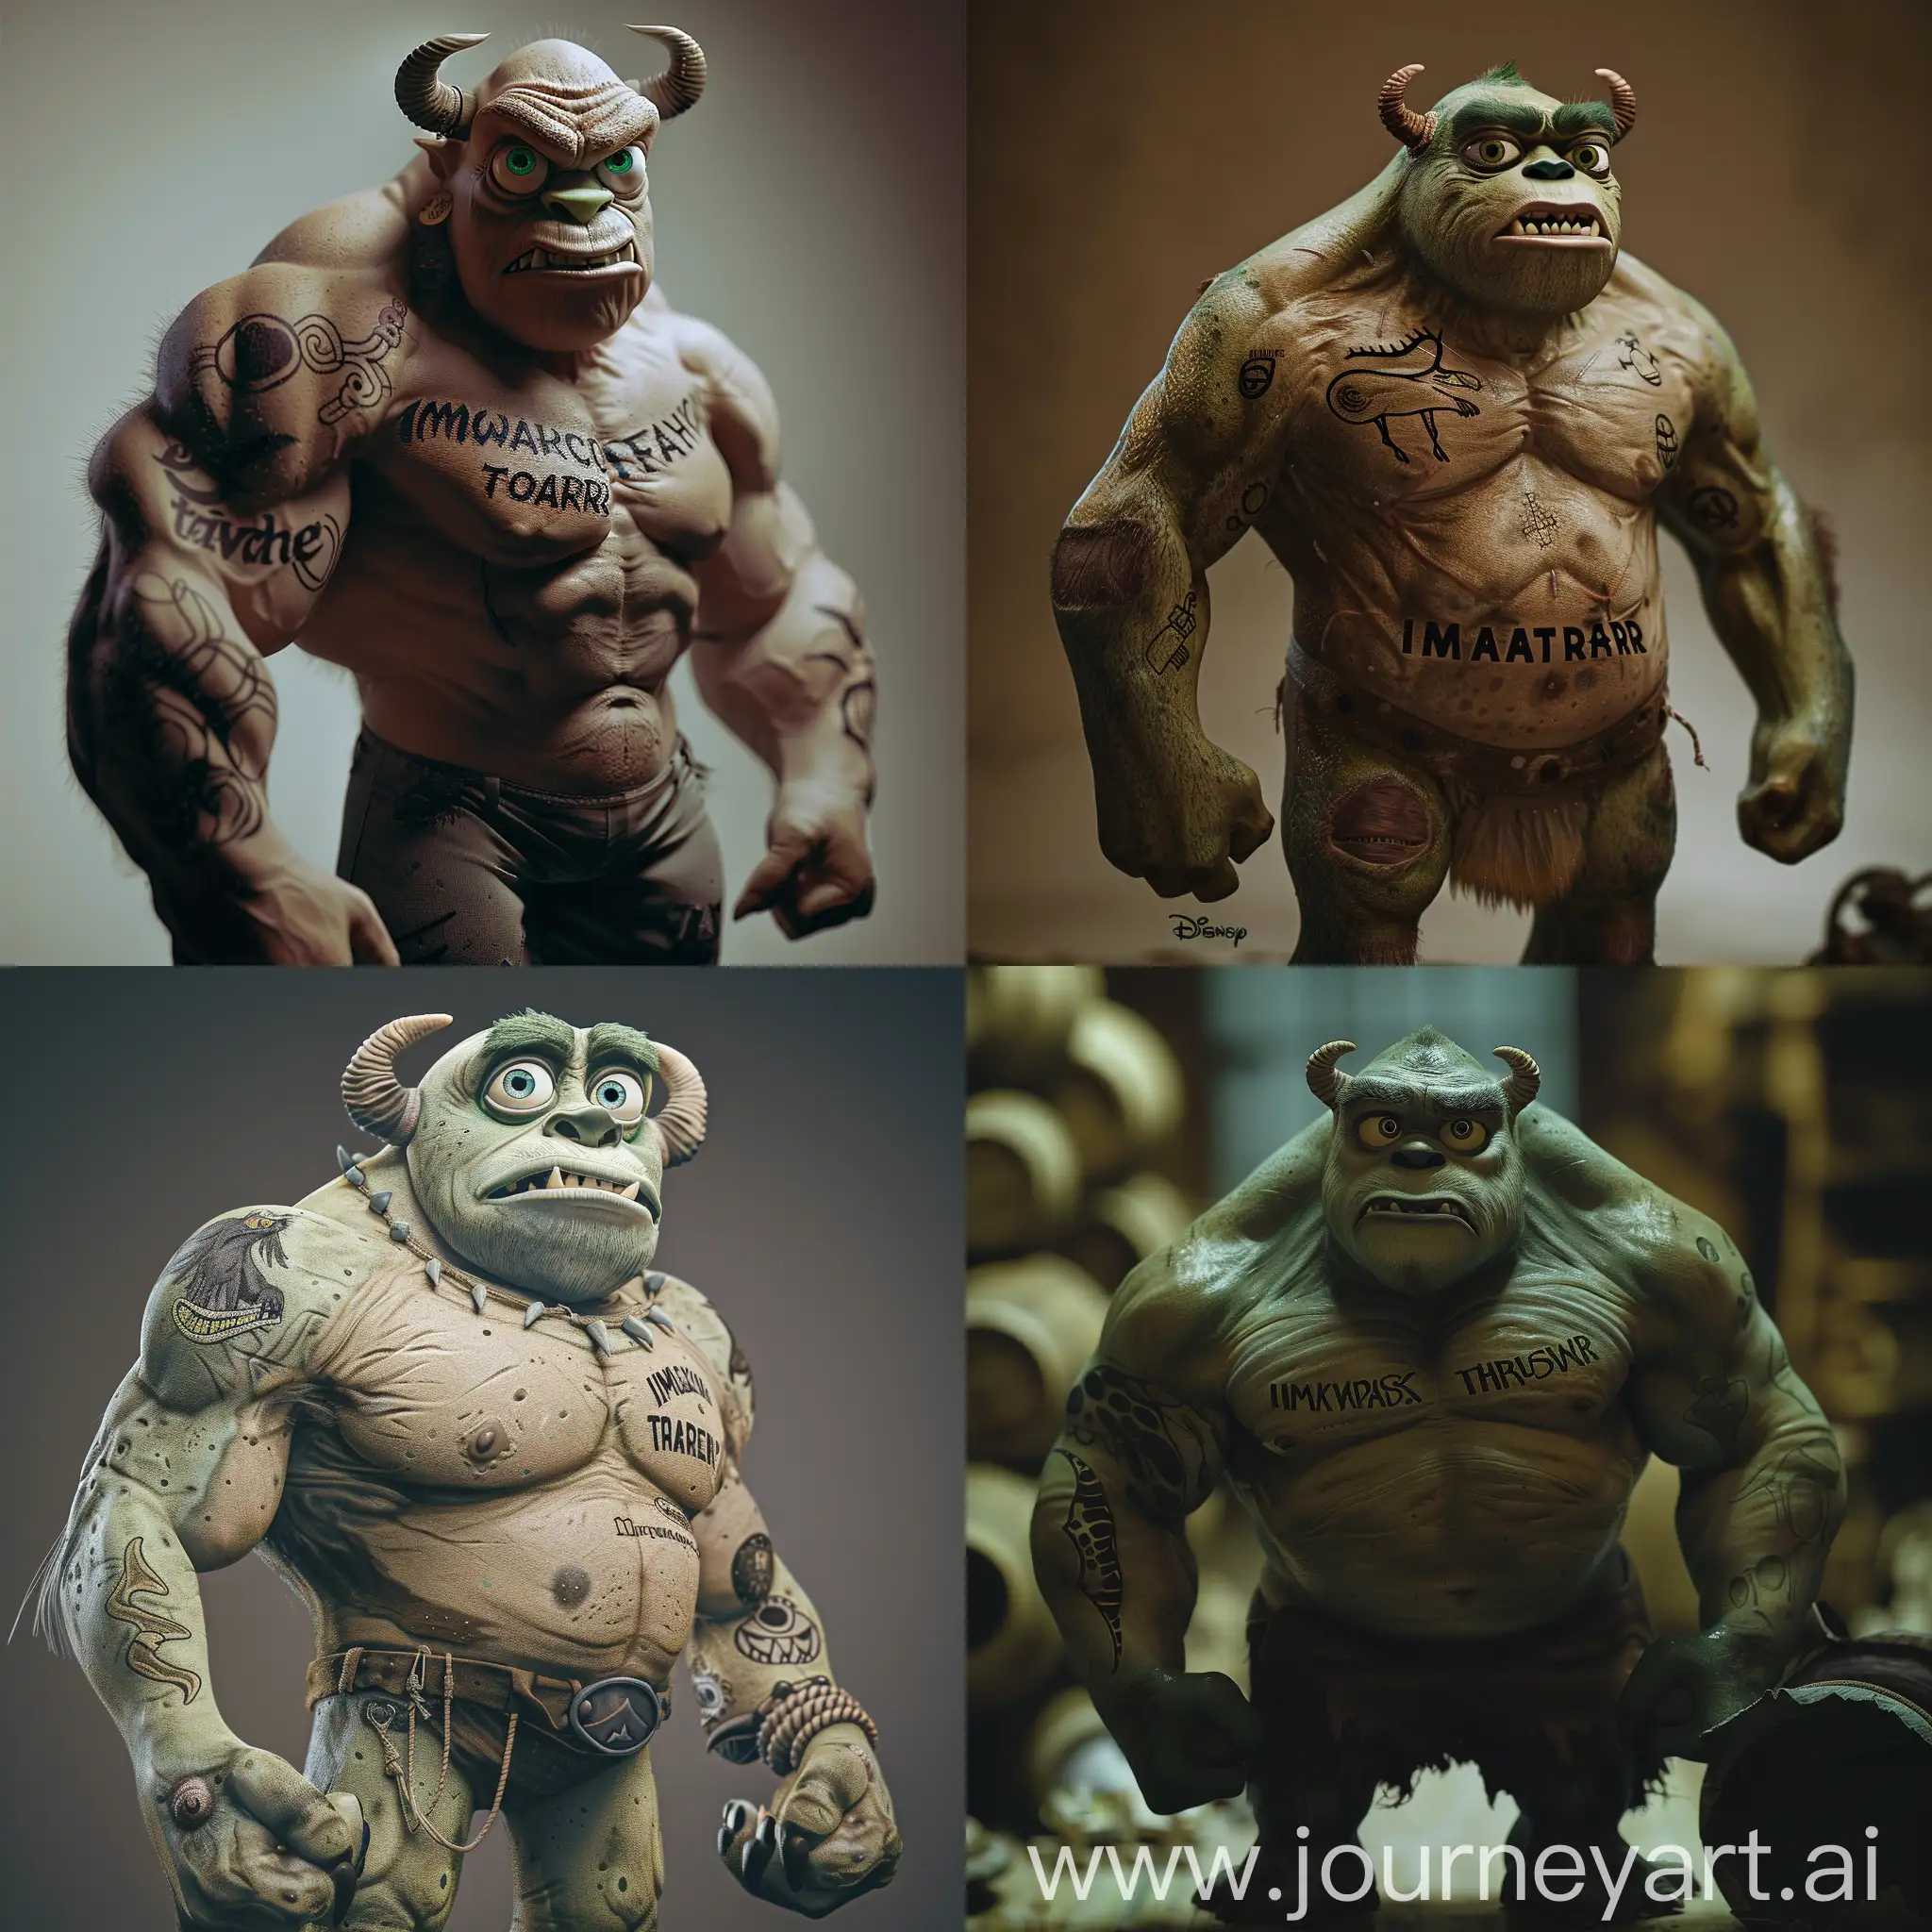 Gigachad with face of Mike Wazowski from Monsters, Inc. He is very muscular, and has a tattoo that says 'impala trader' on his left arm.